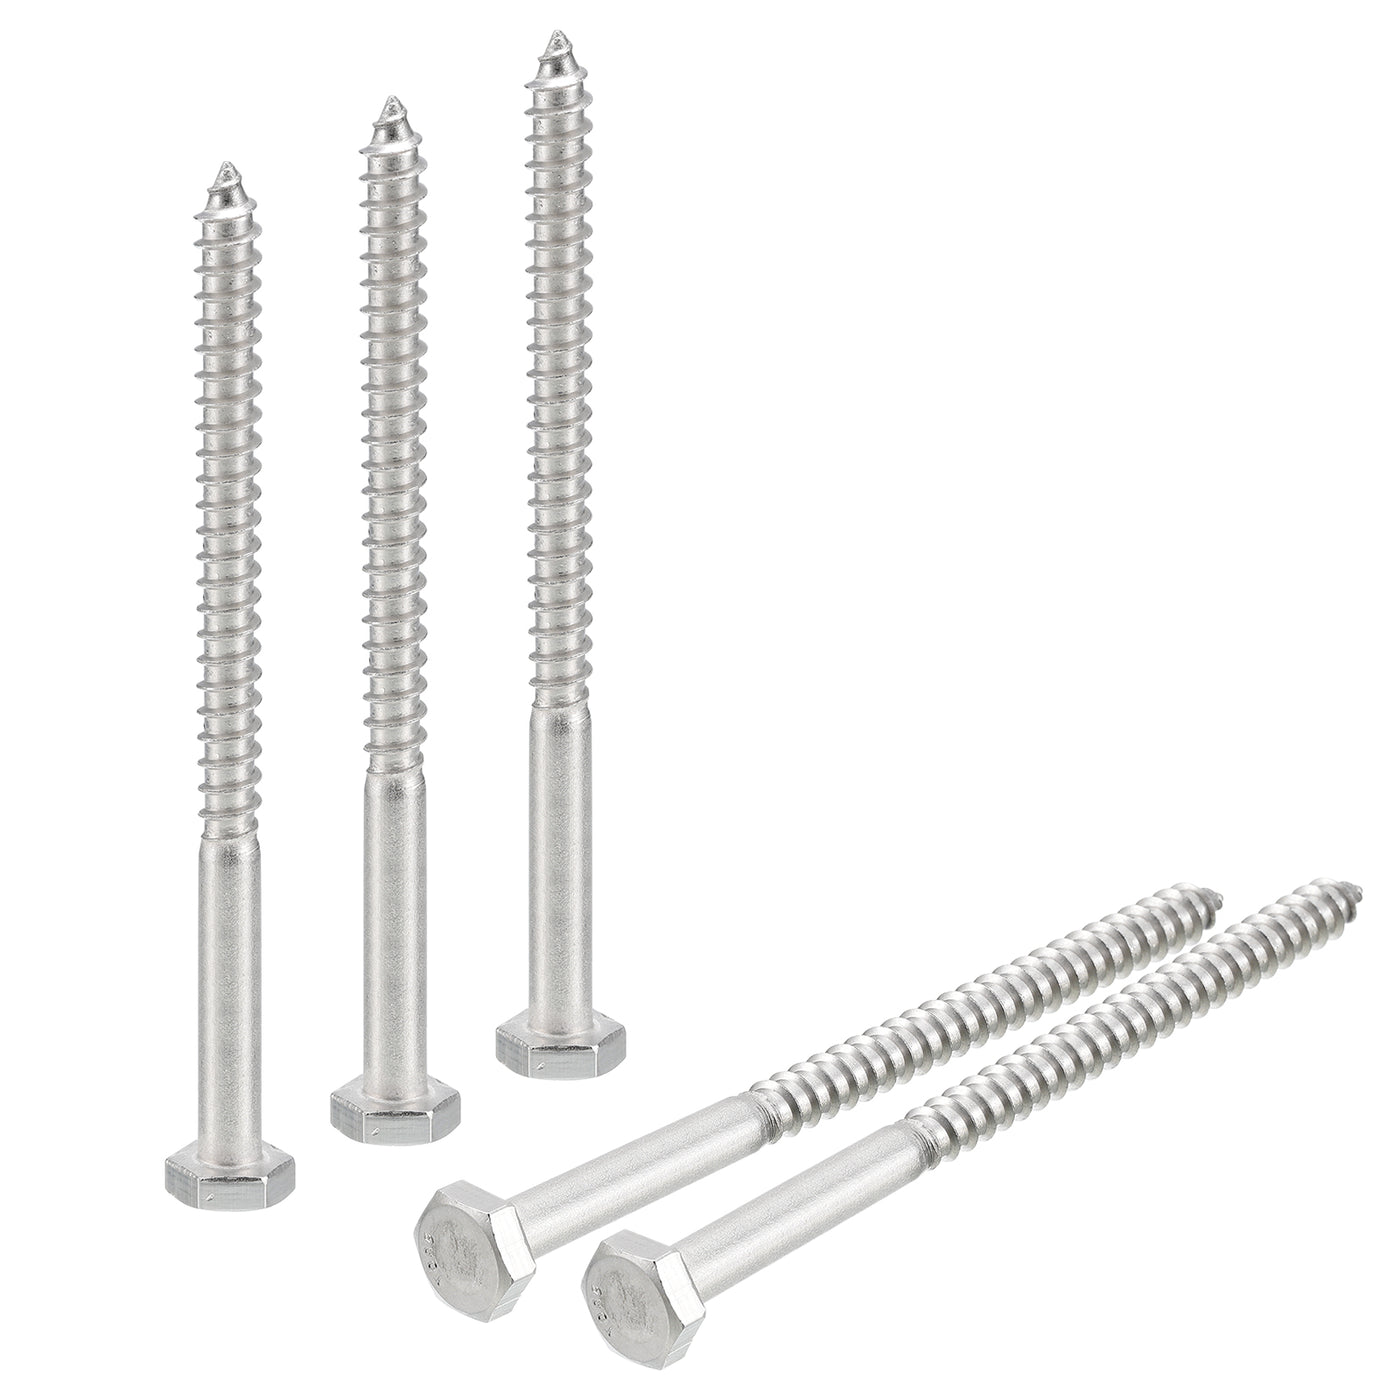 uxcell Uxcell Hex Head Lag Screws Bolts, 20pcs 1/4" x 3-1/2" 304 Stainless Steel Wood Screws